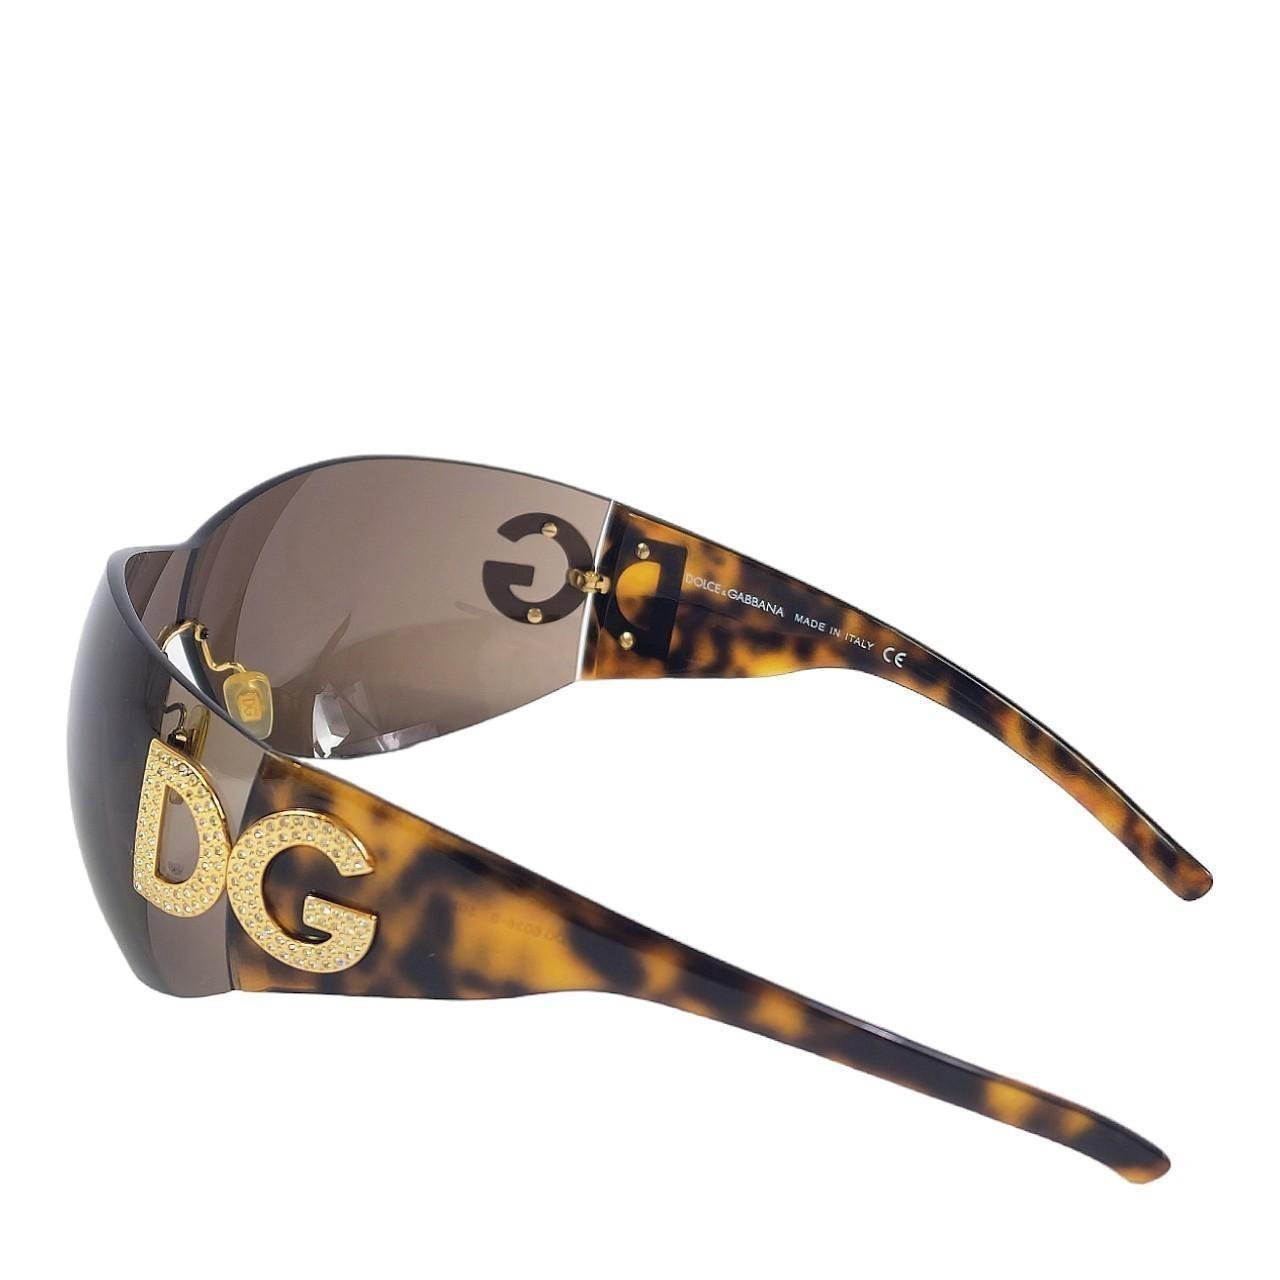 Dolce & Gabbana Men's Brown and Gold Sunglasses - 2